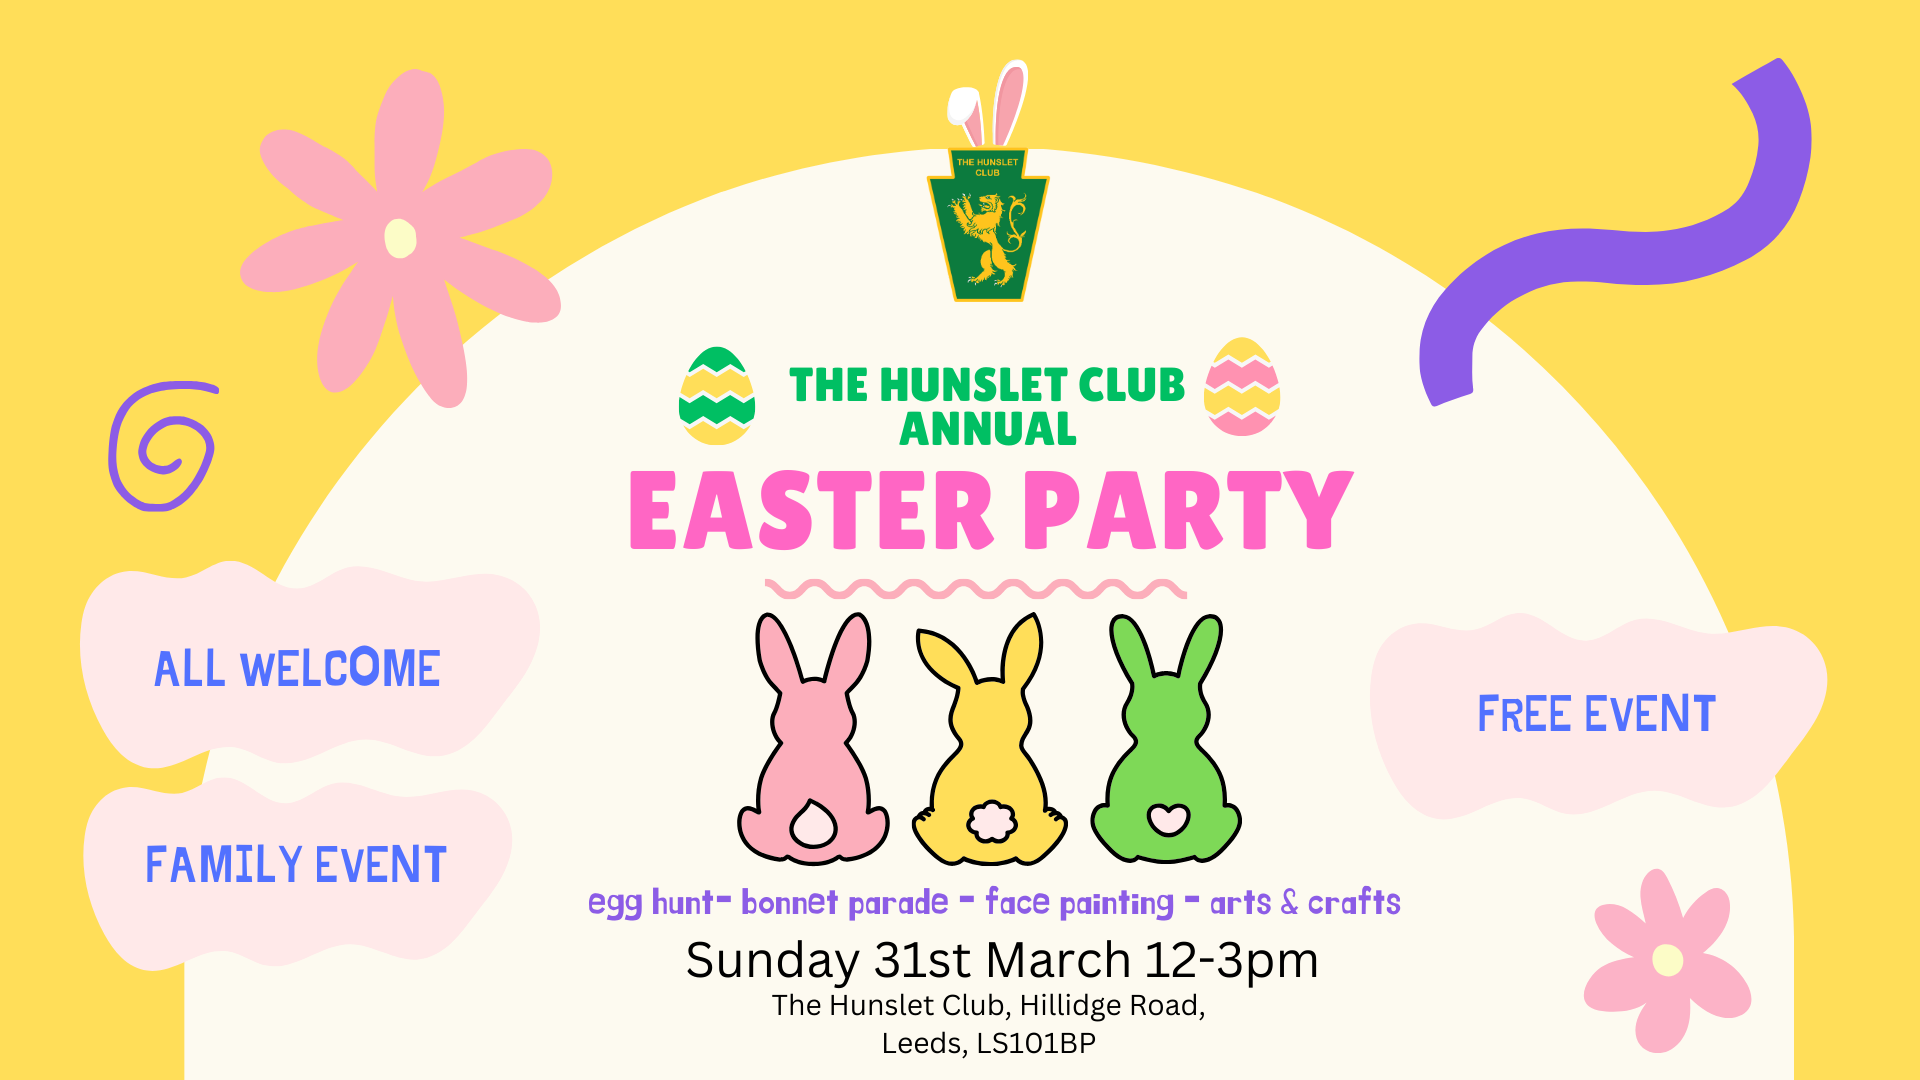 Free Easter Party at The Hunslet Club